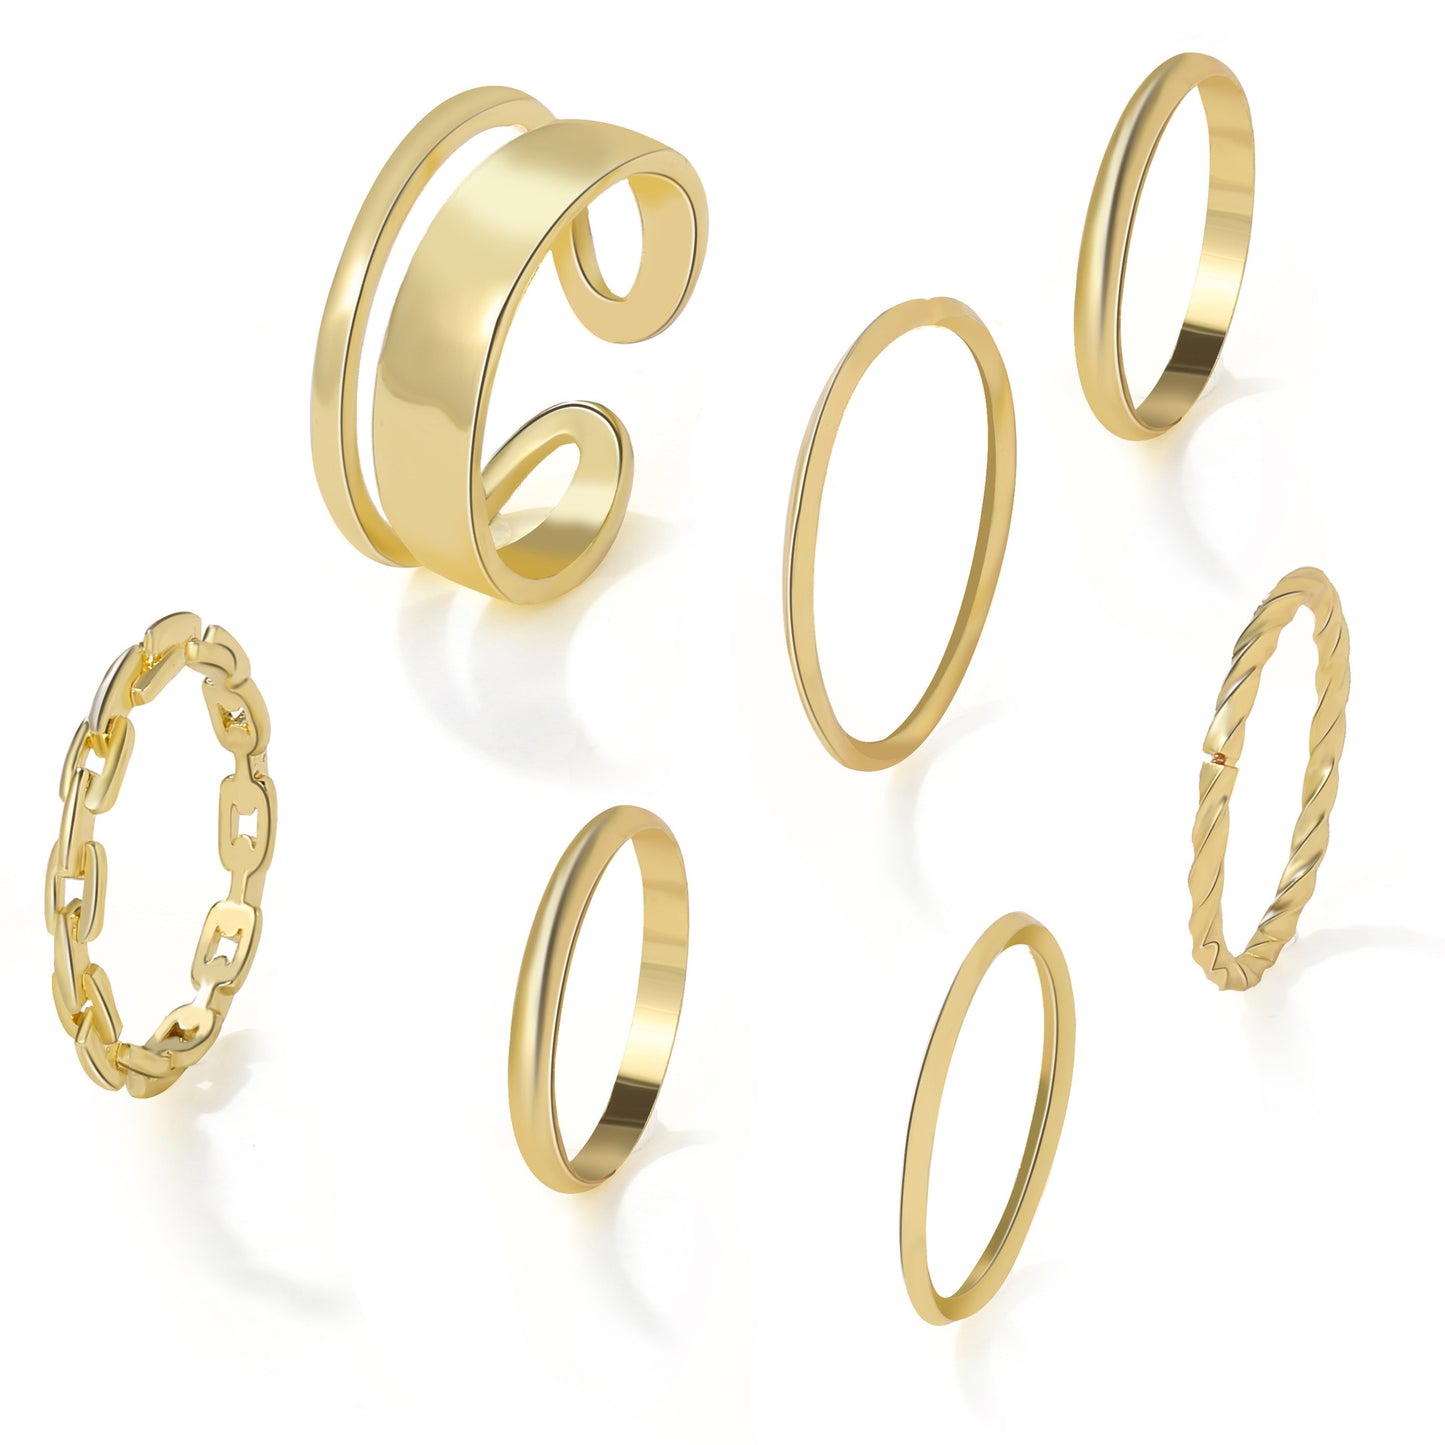 Simple Geometic Alloy Ring 7 Pieces Set